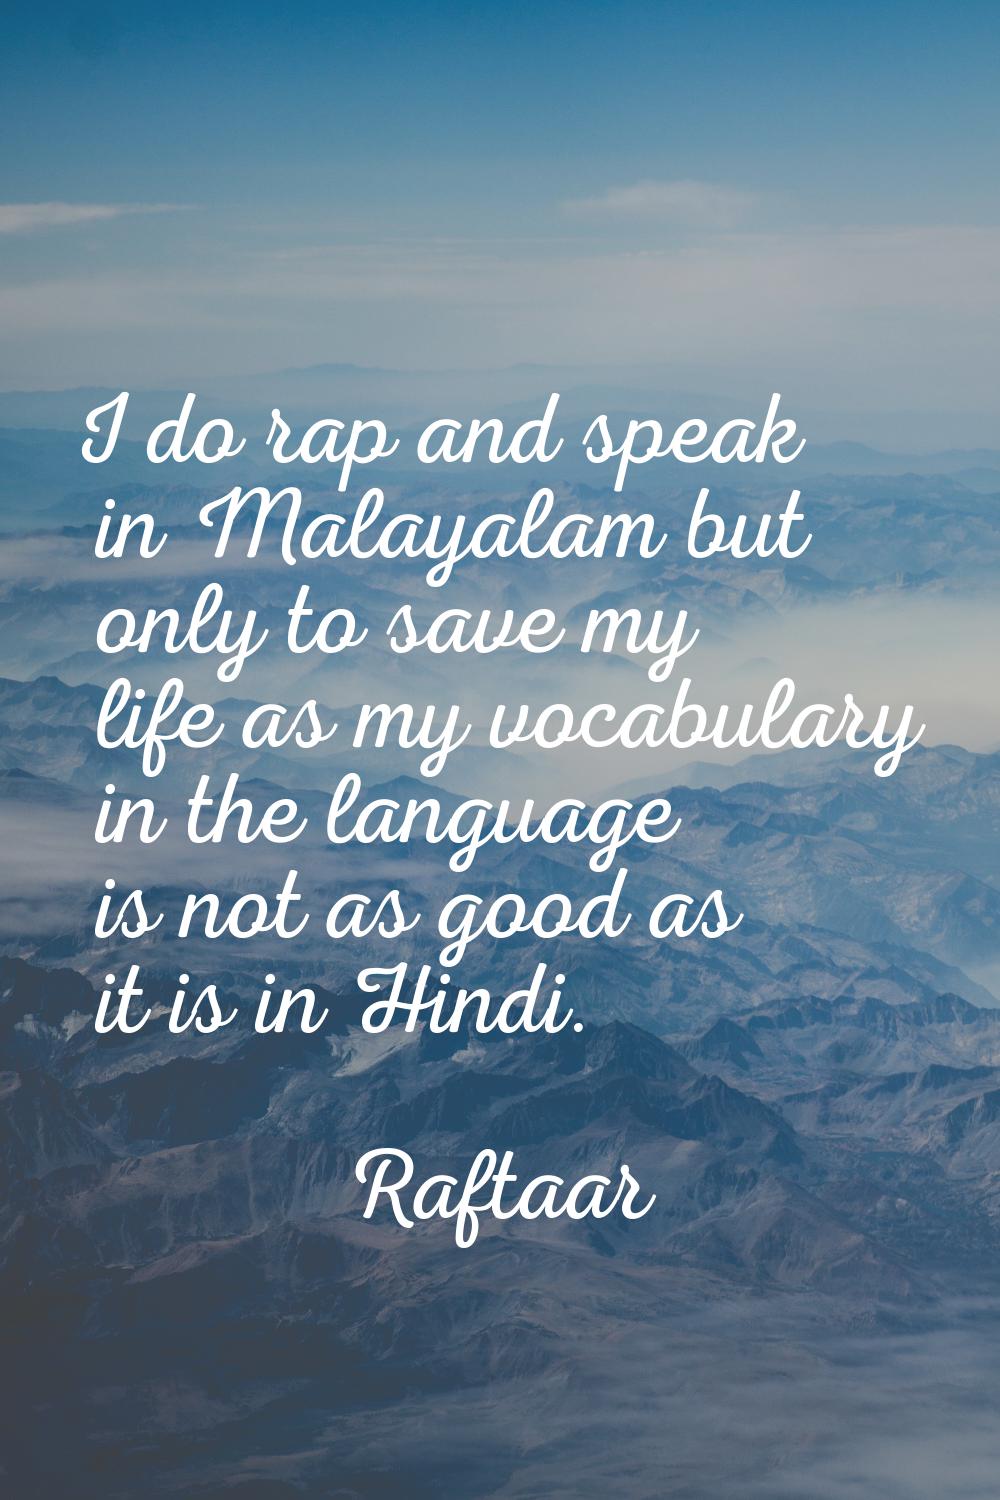 I do rap and speak in Malayalam but only to save my life as my vocabulary in the language is not as